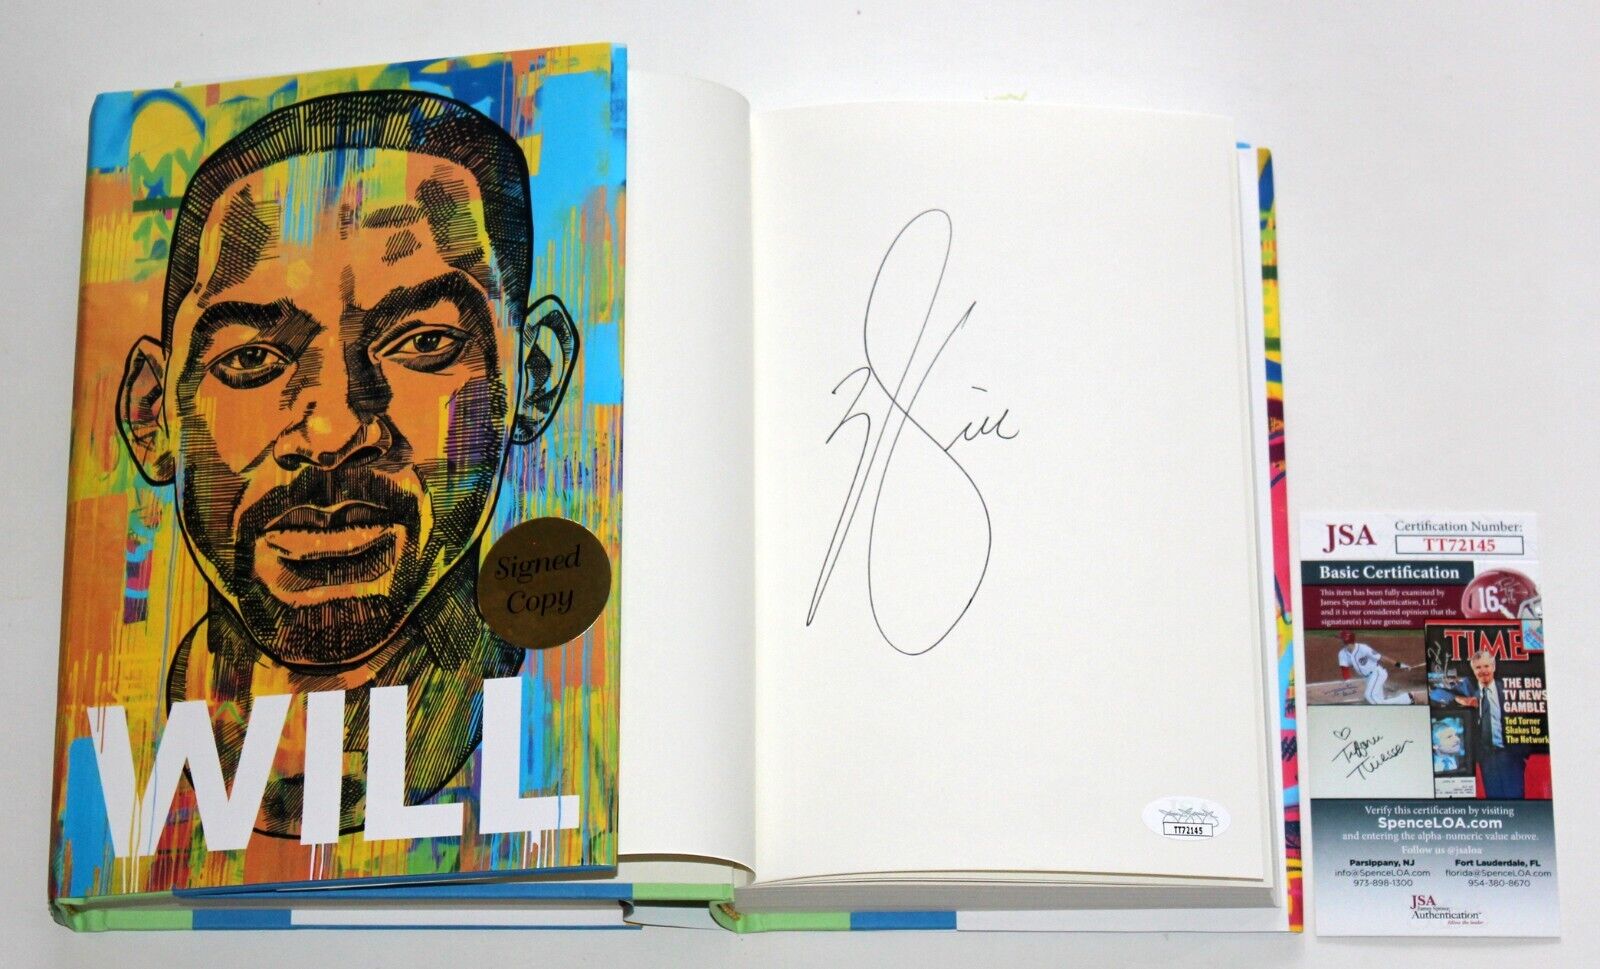 WILL SMITH SIGNED WILL 1ST EDITION HARDCOVER BOOK MEMOIR AUTOGRAPHED +JSA COA